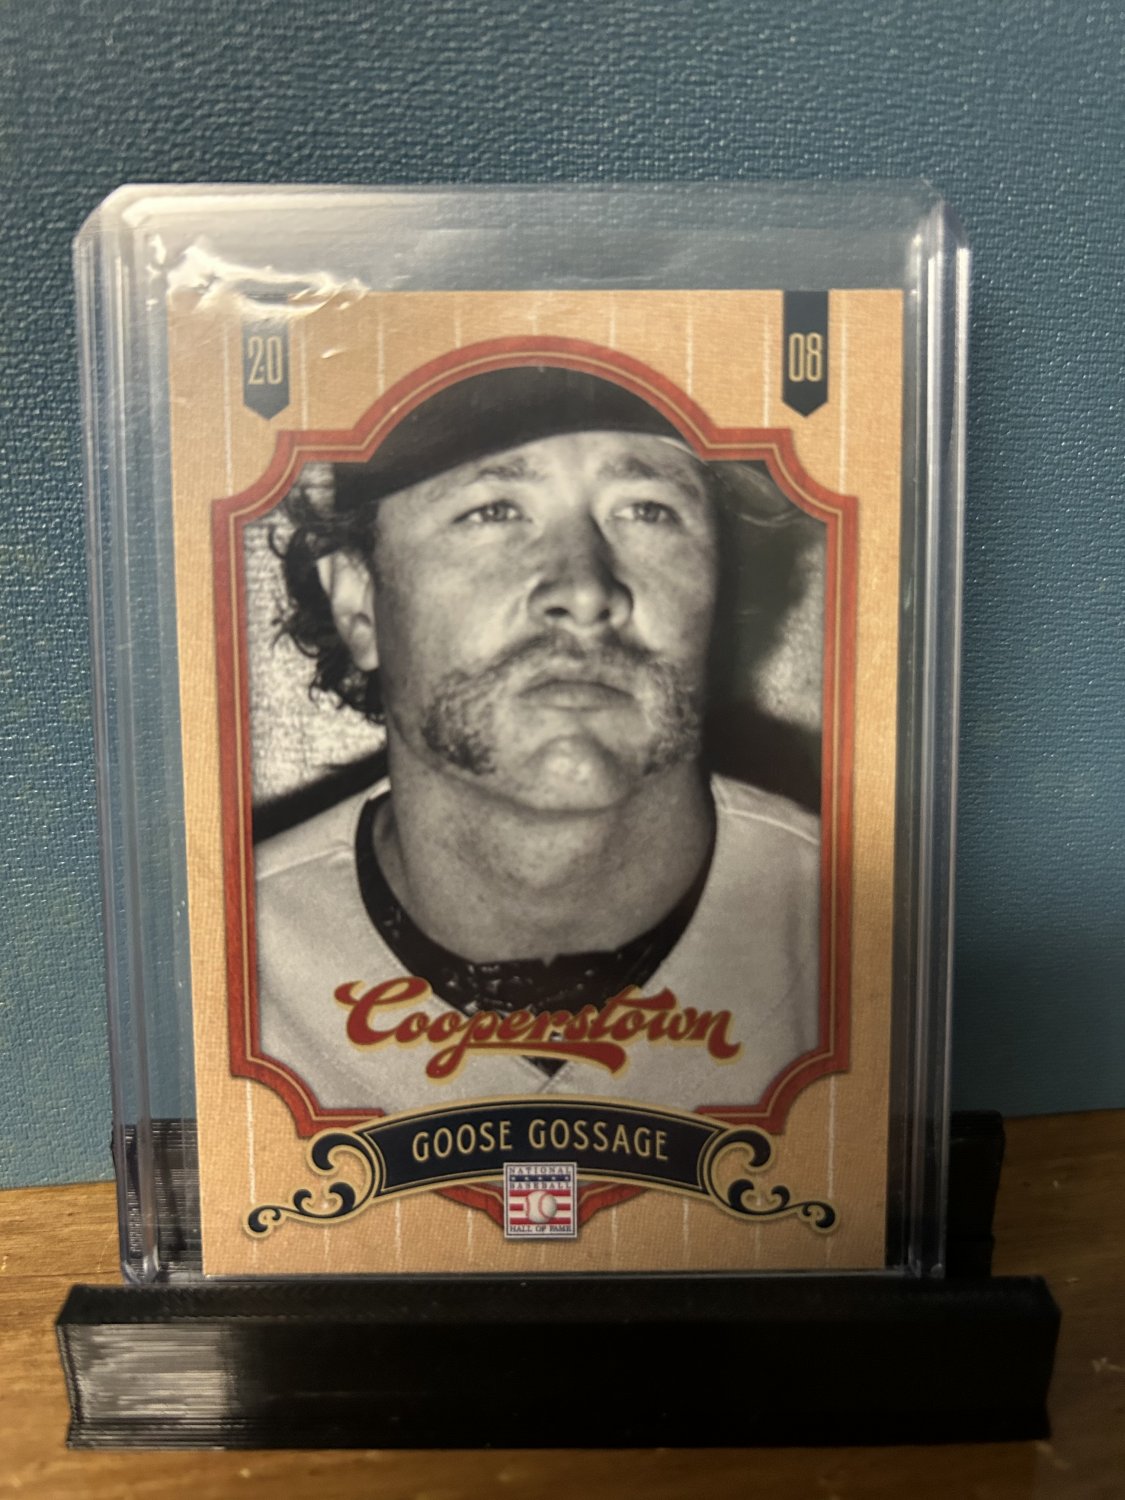 2012 Panini Cooperstown Goose Gossage #127